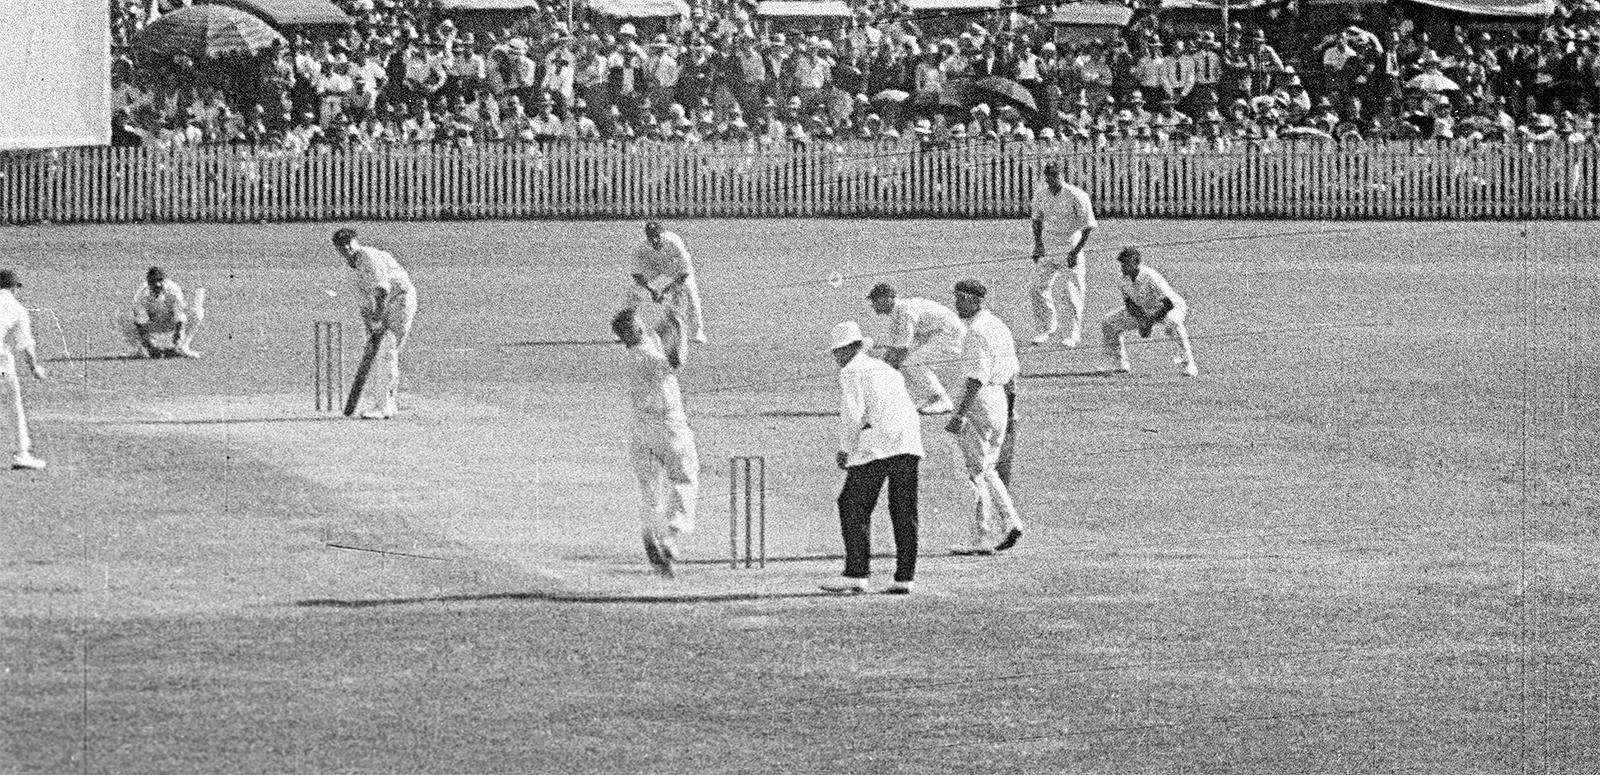 Cricket players and an umpire on the Sydney Cricket Ground playing cricket in 1933.